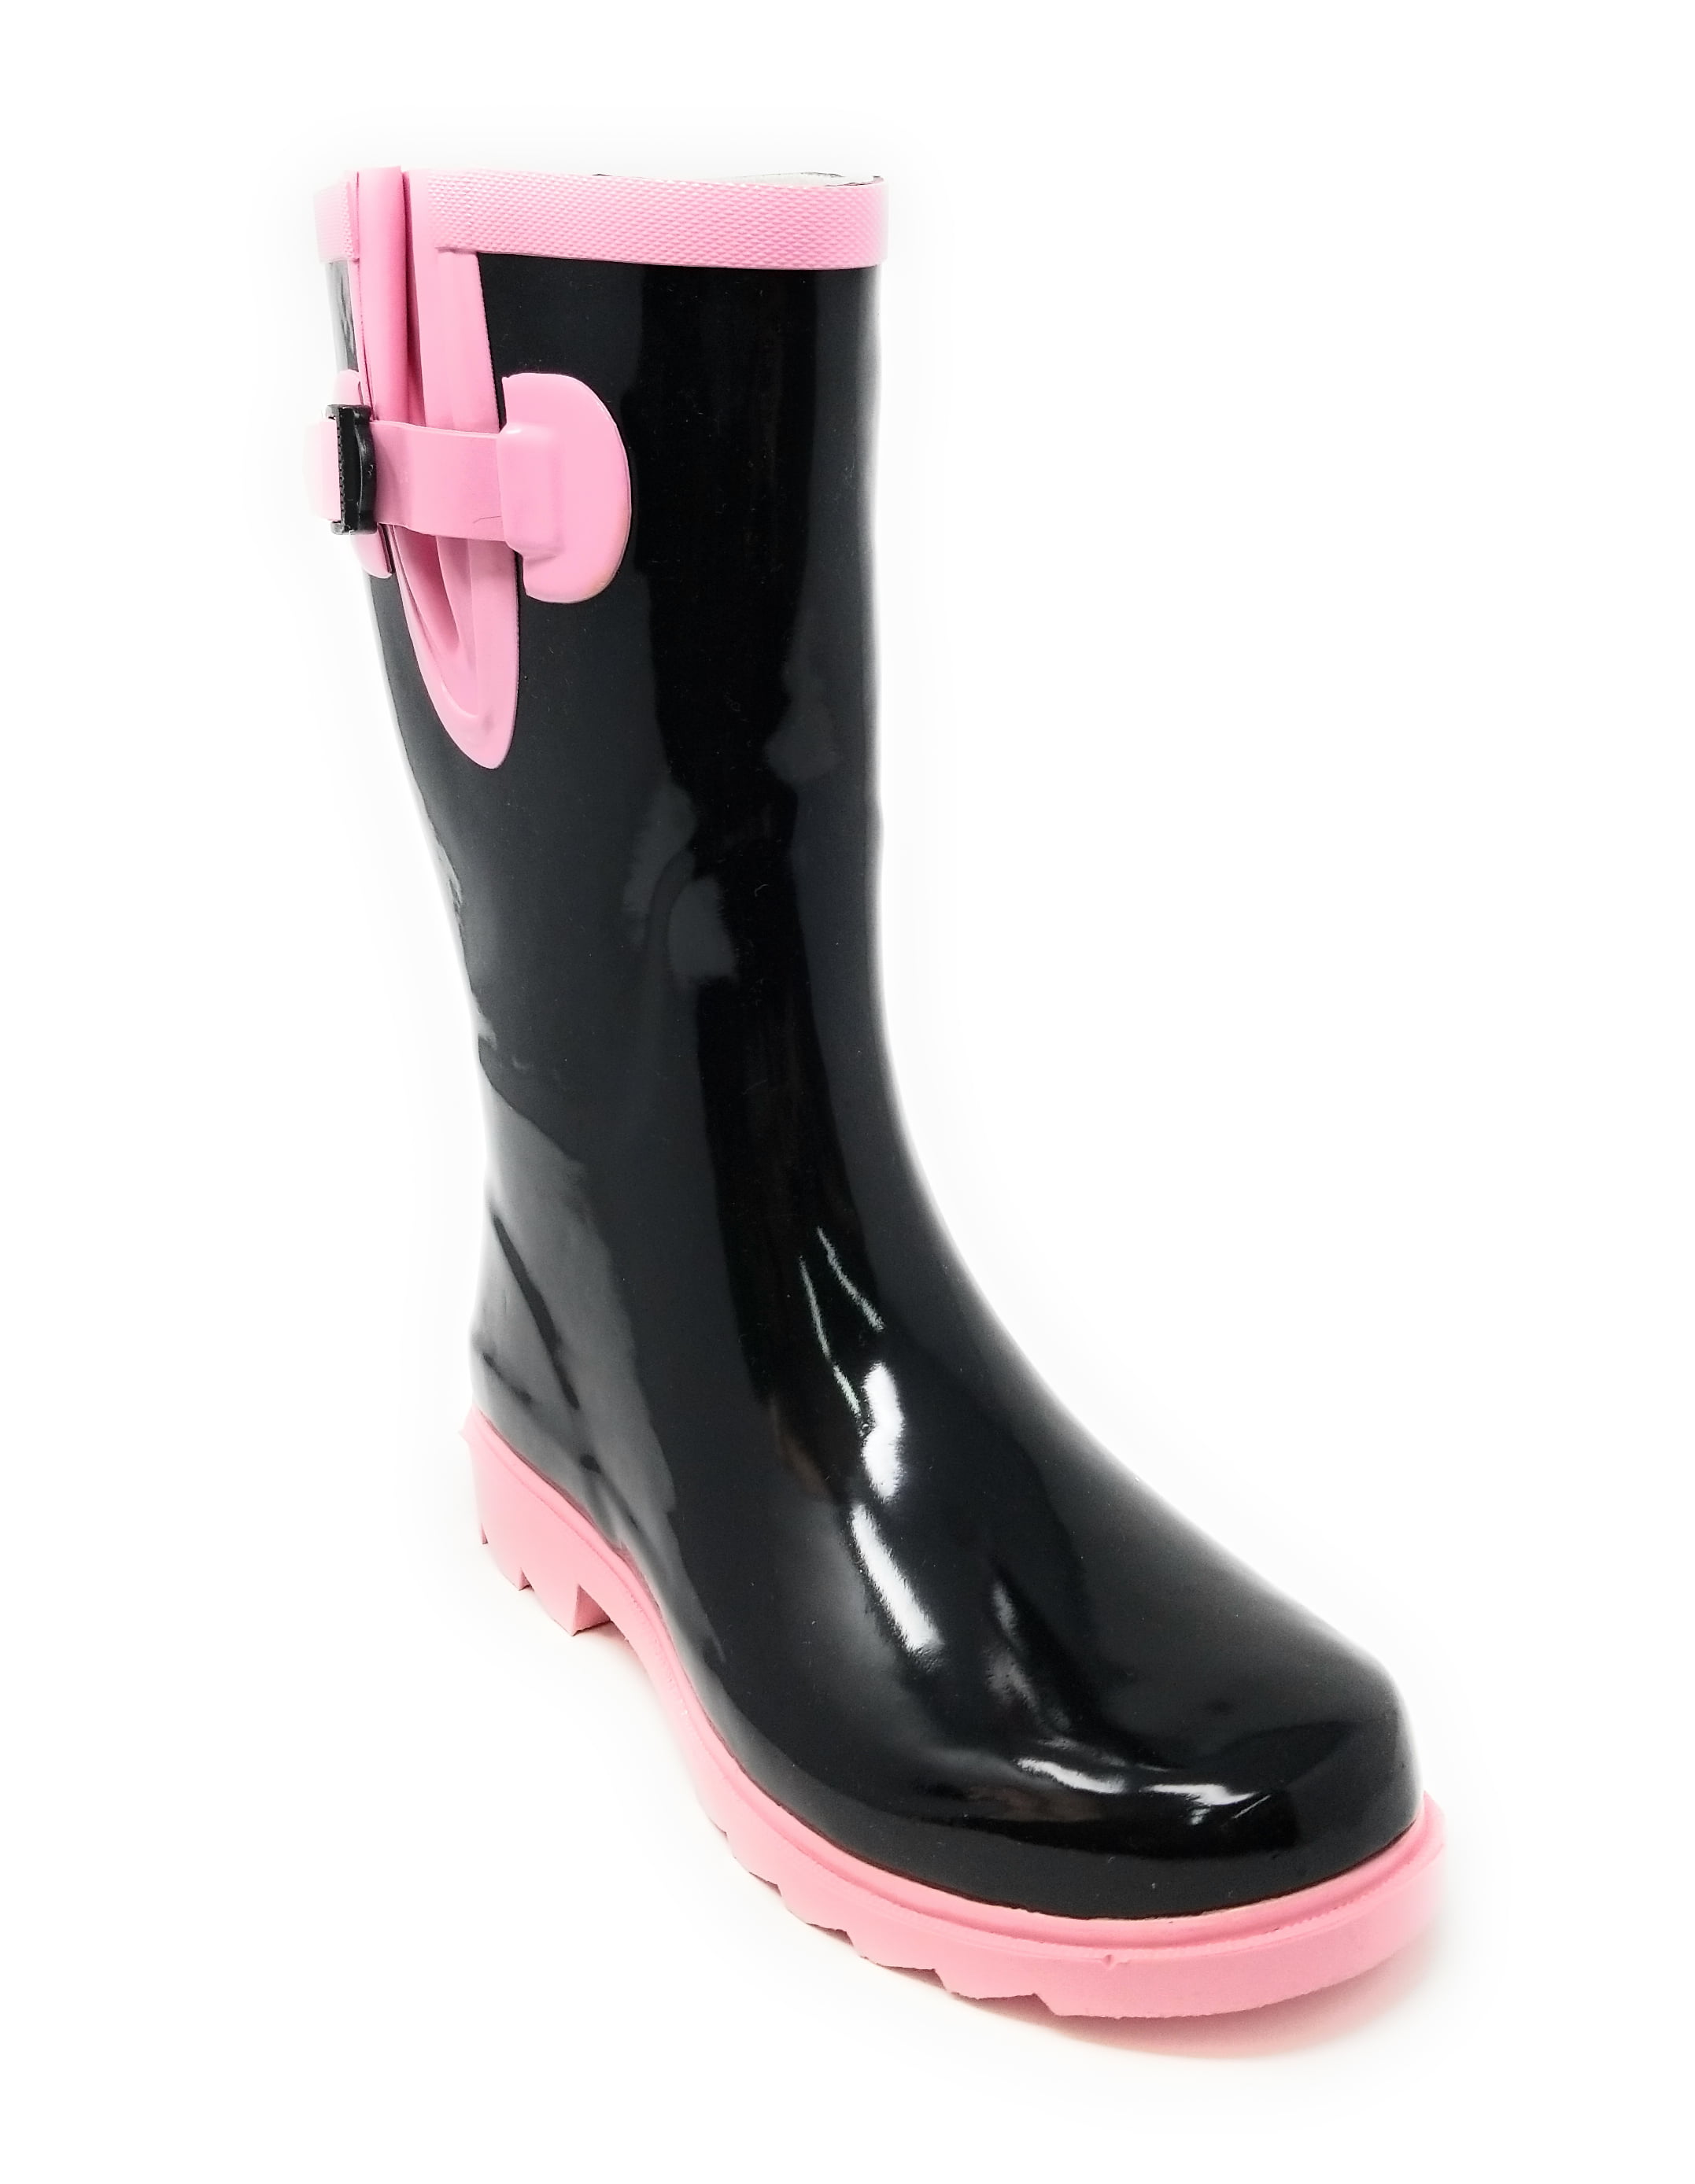 11 Mid-Calf Rain Boots for Waterproof Outdoor Garden Shoes Pink Size 6 Women Rubber Rain Boots Colorful Designs Wellies 